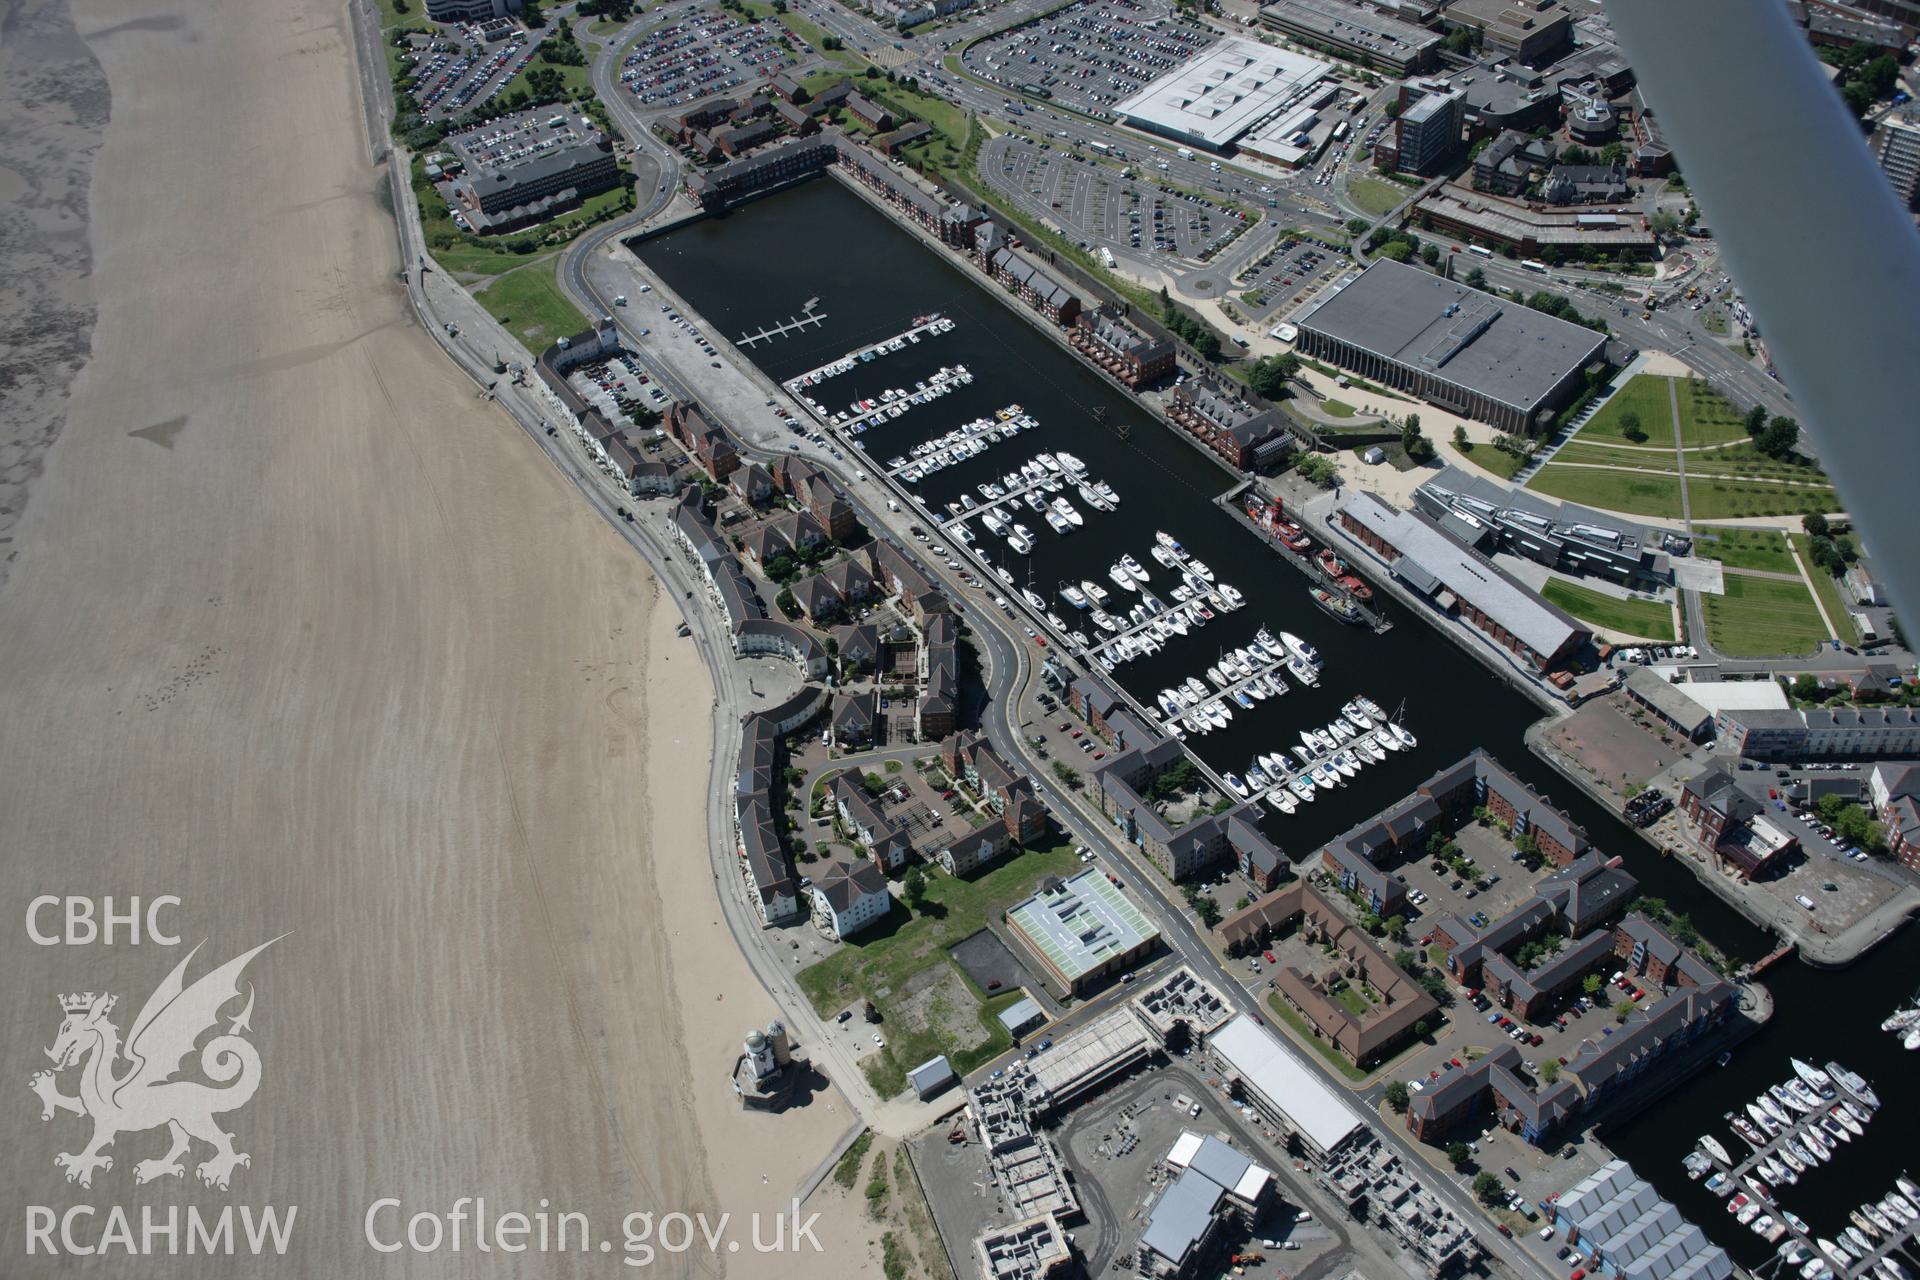 RCAHMW colour oblique aerial photograph of South Dock, now Swansea Marina, from the south-east. Taken on 22 June 2005 by Toby Driver